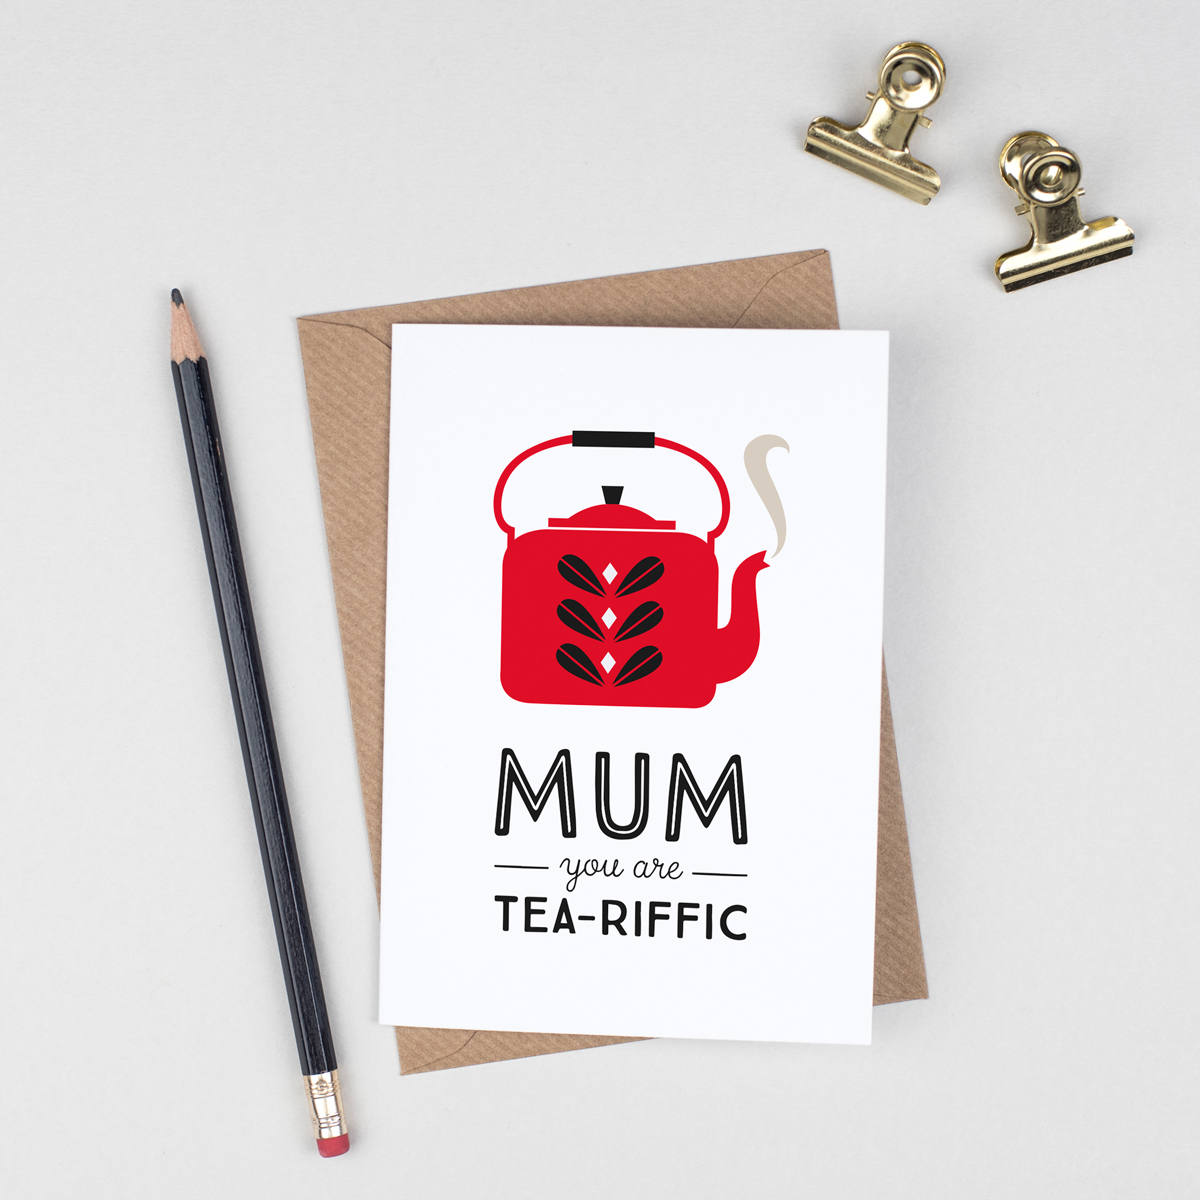 Mothers Day Card, Retro Birthday Card for Mum, Mothers Day Gift, Unique Scandinavian Tea Pot Kettle, Mid Century Card, Catherine Holm Art